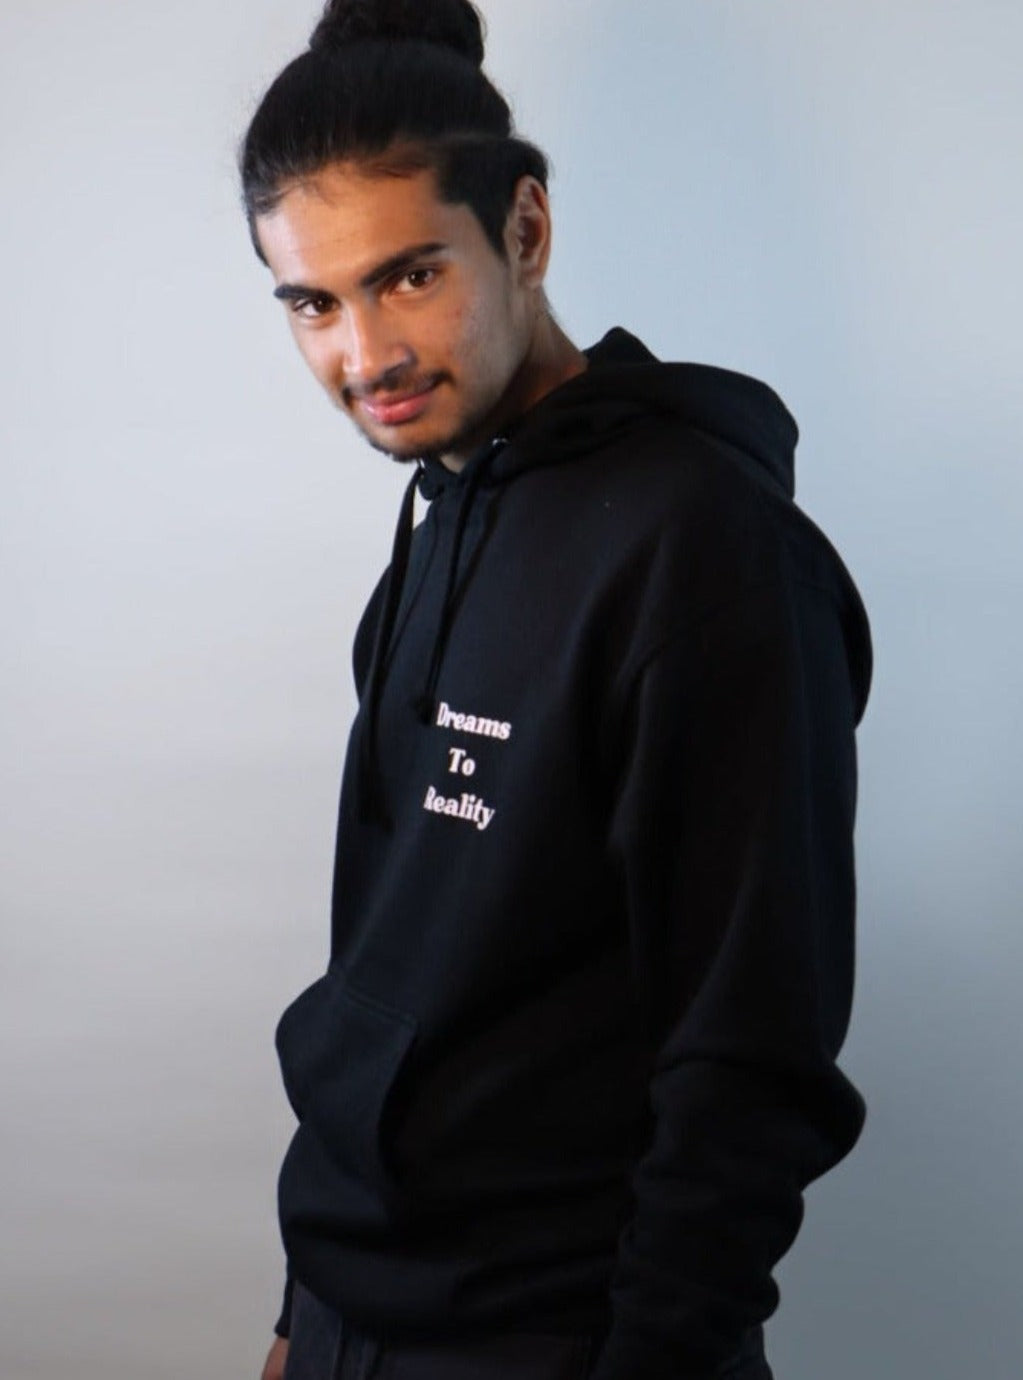 CLASSIC DREAMS TO REALITY HOODIE - BLACK